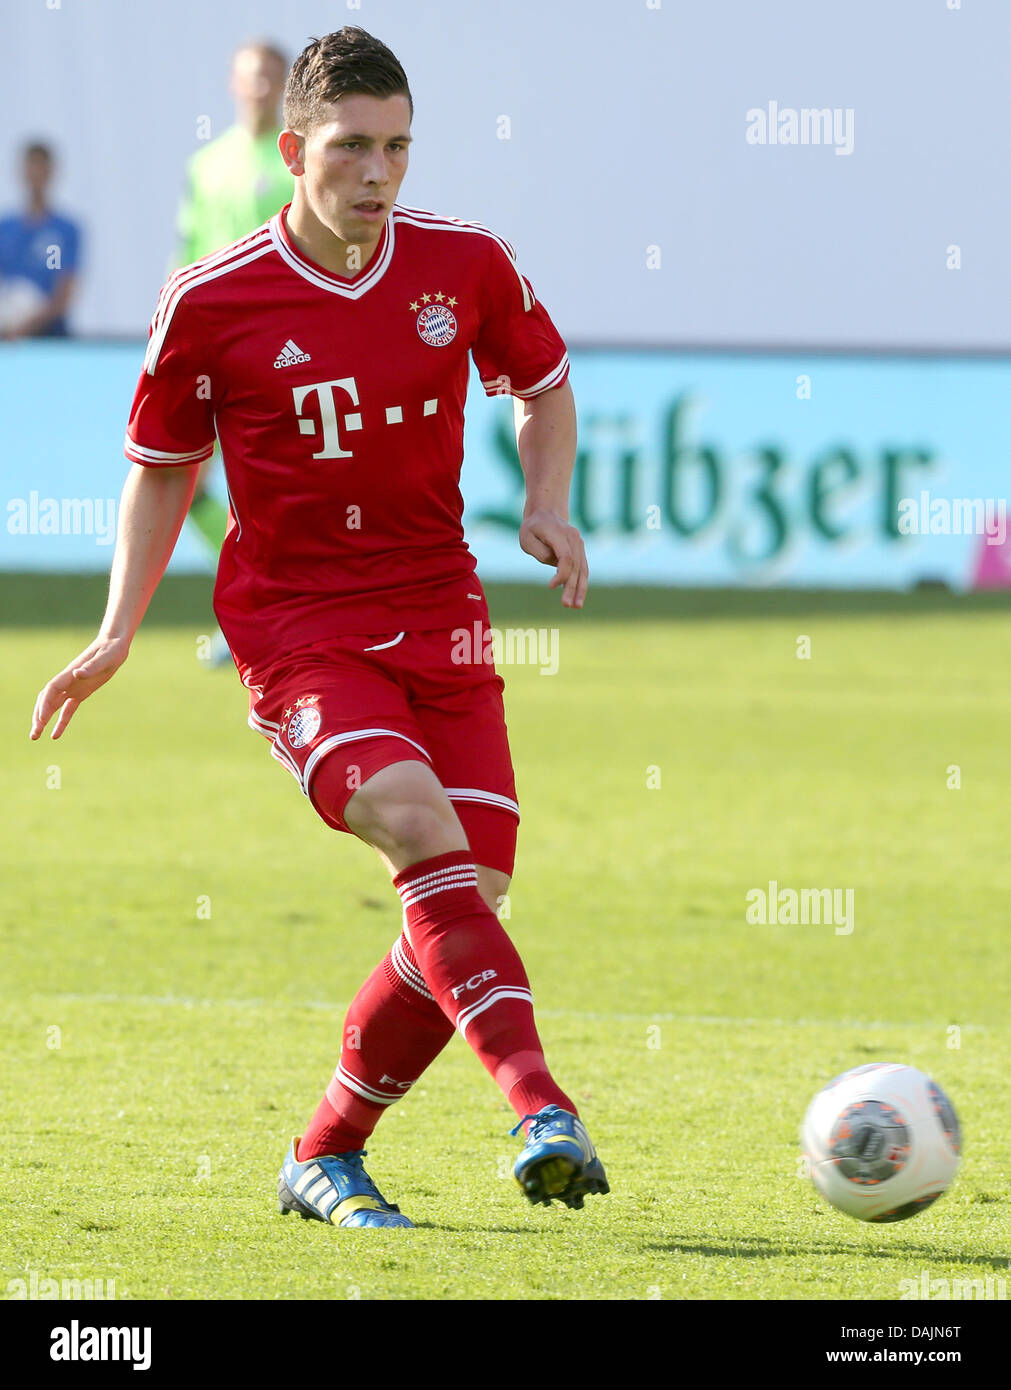 Rostock, Germany. 14th July, 2013. Bayern Munich's Pierre Hojbjerg in action during the charity soccer match between FC Hansa Rostock and FC Bayern Munich at the DKB-Arena soccer stadium in Rostock, Germany, 14 July 2013. Munich won 4-0. Photo: Bernd Wuestneck/dpa/Alamy Live News Stock Photo